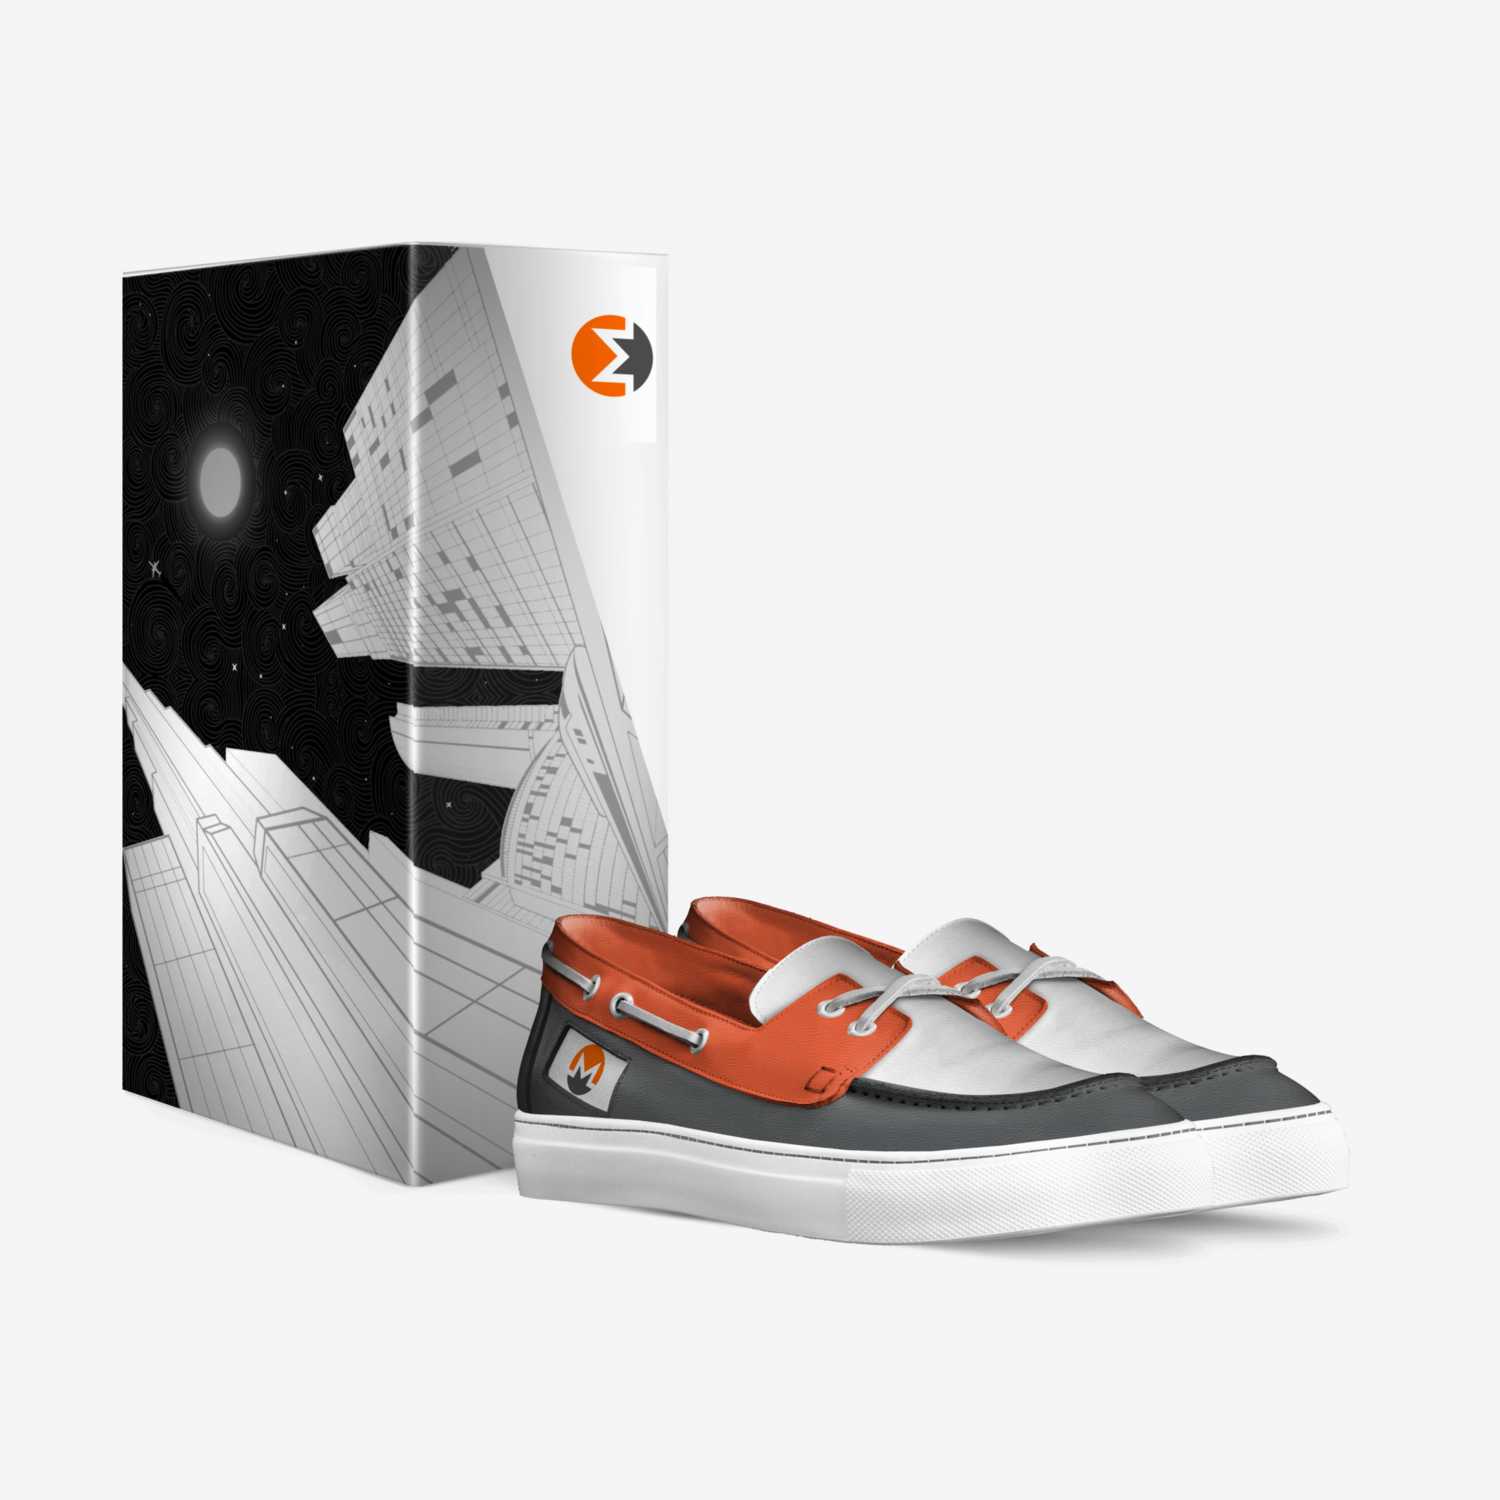 Monero custom made in Italy shoes by Crypto Shoes | Box view